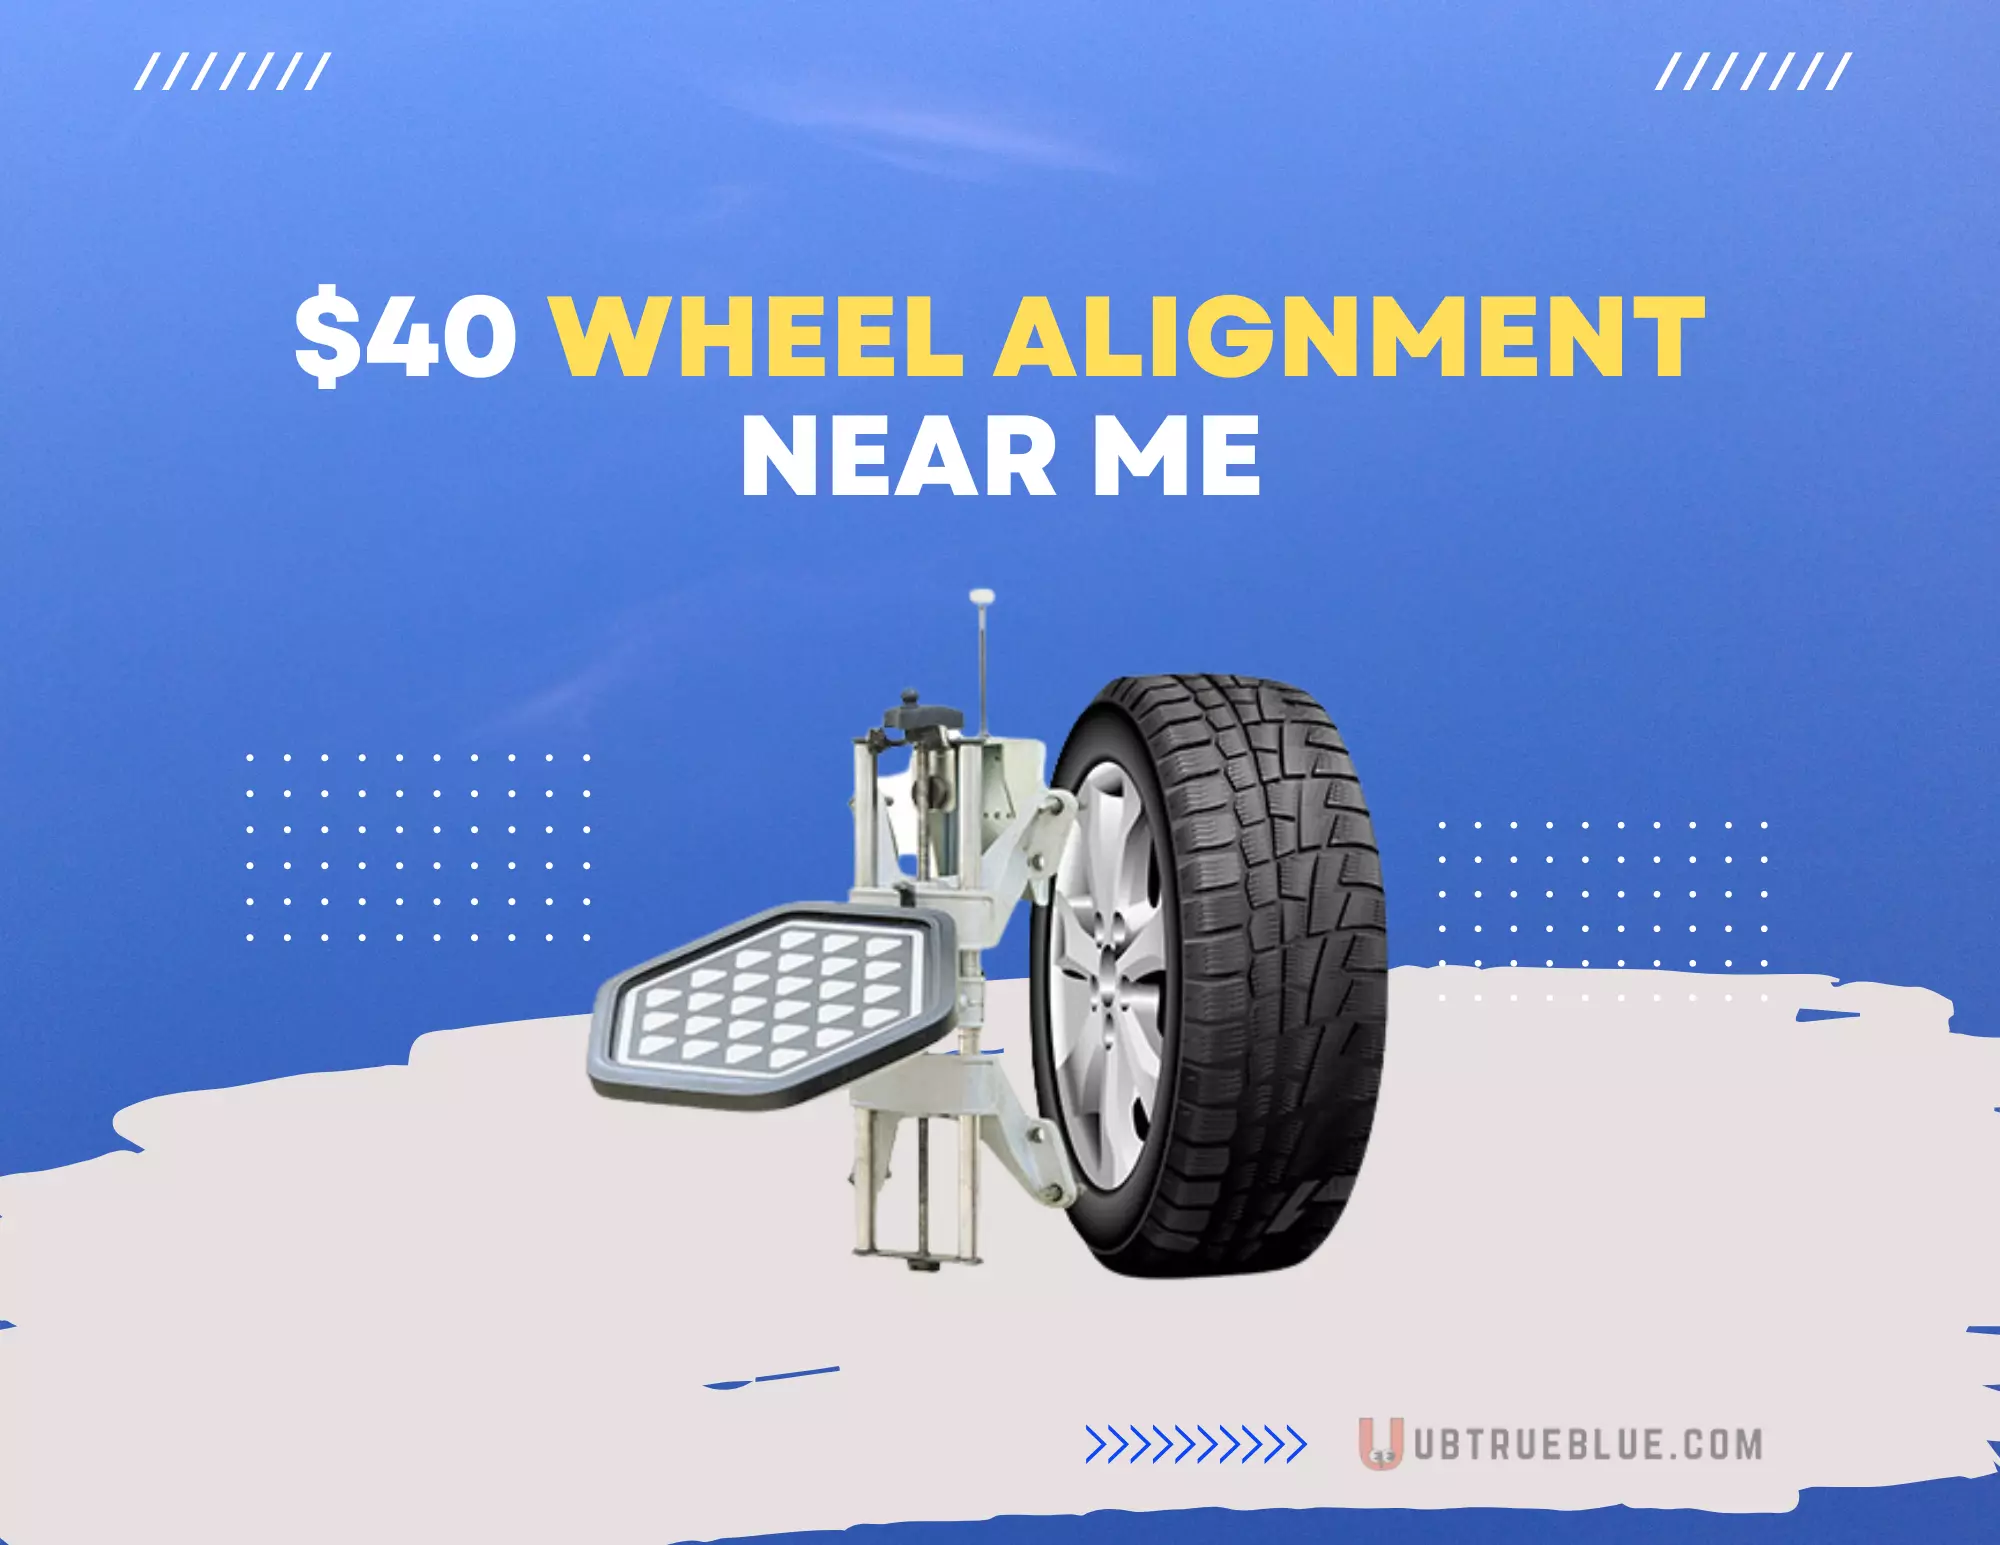 Best Wheel Alignment Near Me On Ubtrueblue Autos & Vehicles Getting $40 - Before You Overpay, Check This Out! Coupons Shop 4 Deals Cheapest  Full